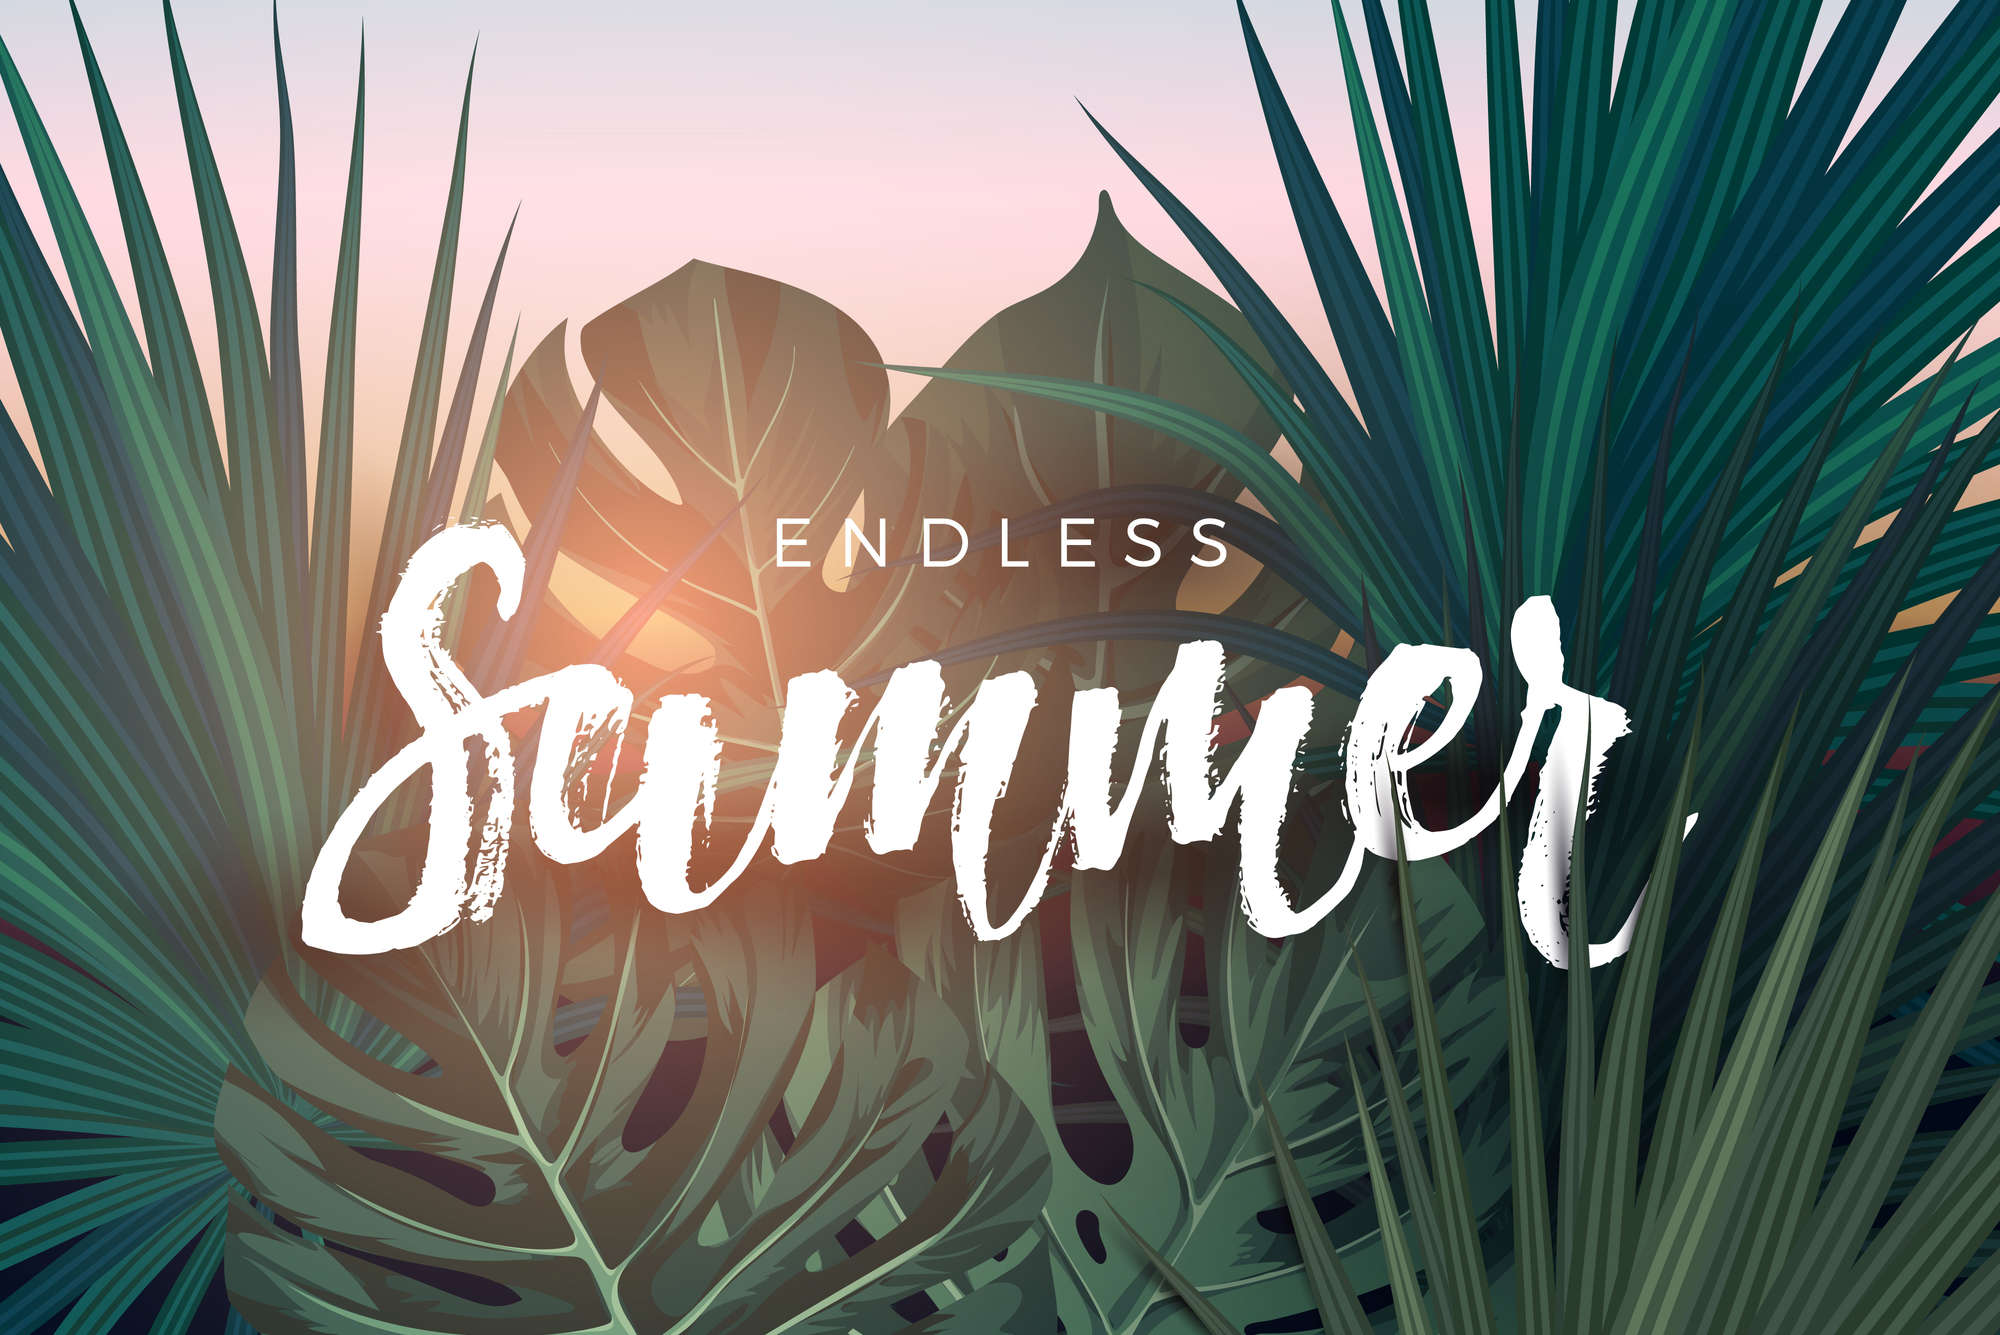             Graphic wall mural "Endless Summer" lettering on premium smooth non-woven
        